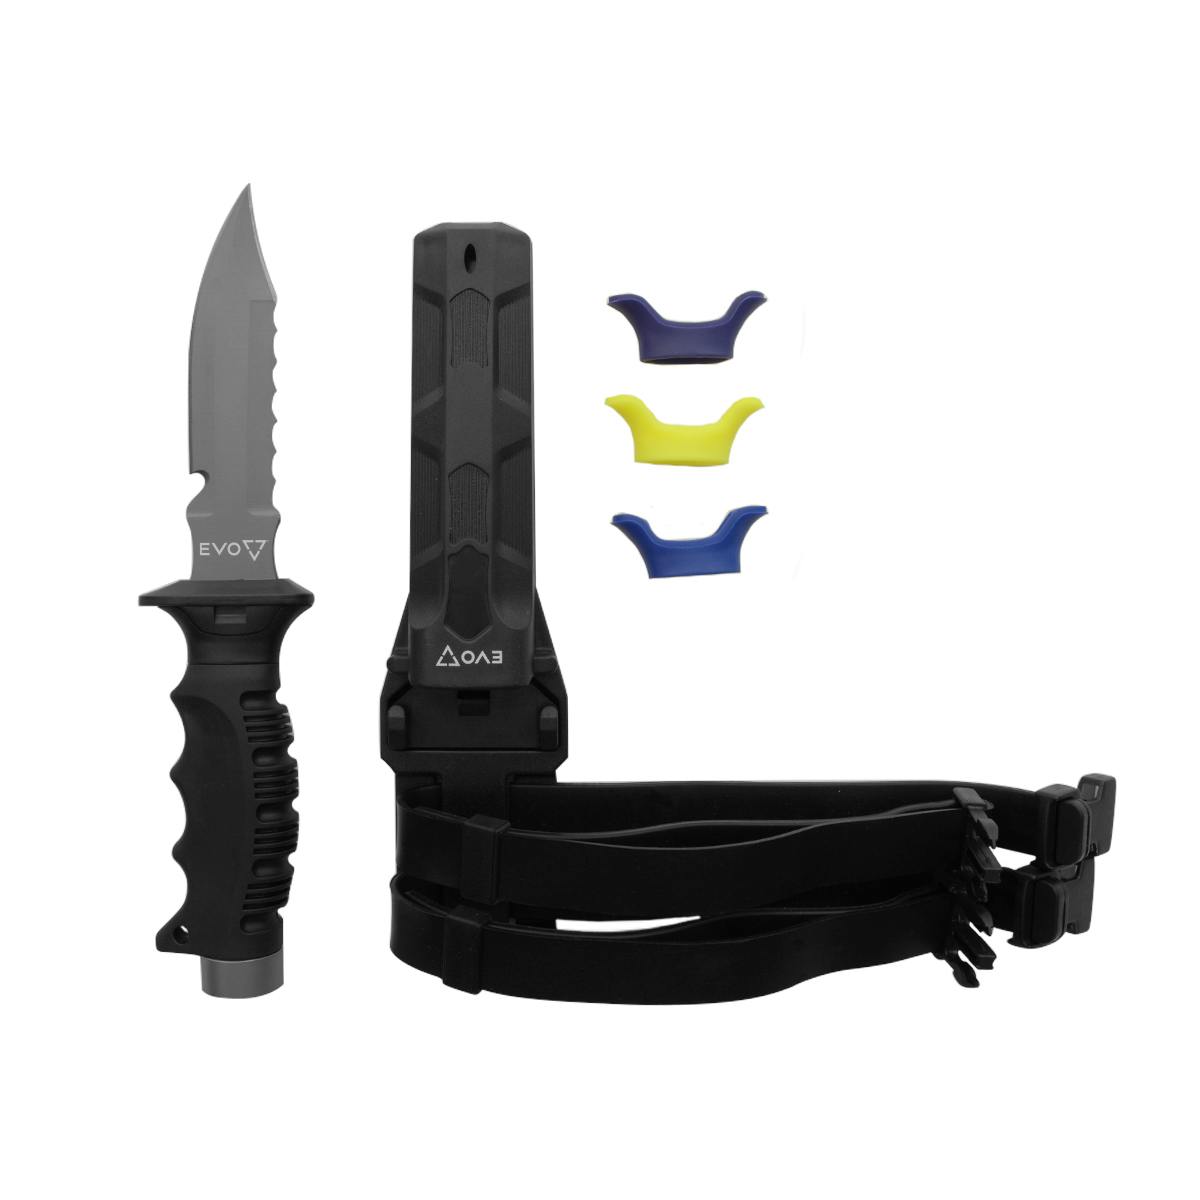 EVO Titanium Dive Knife with all components - Pointed Tip